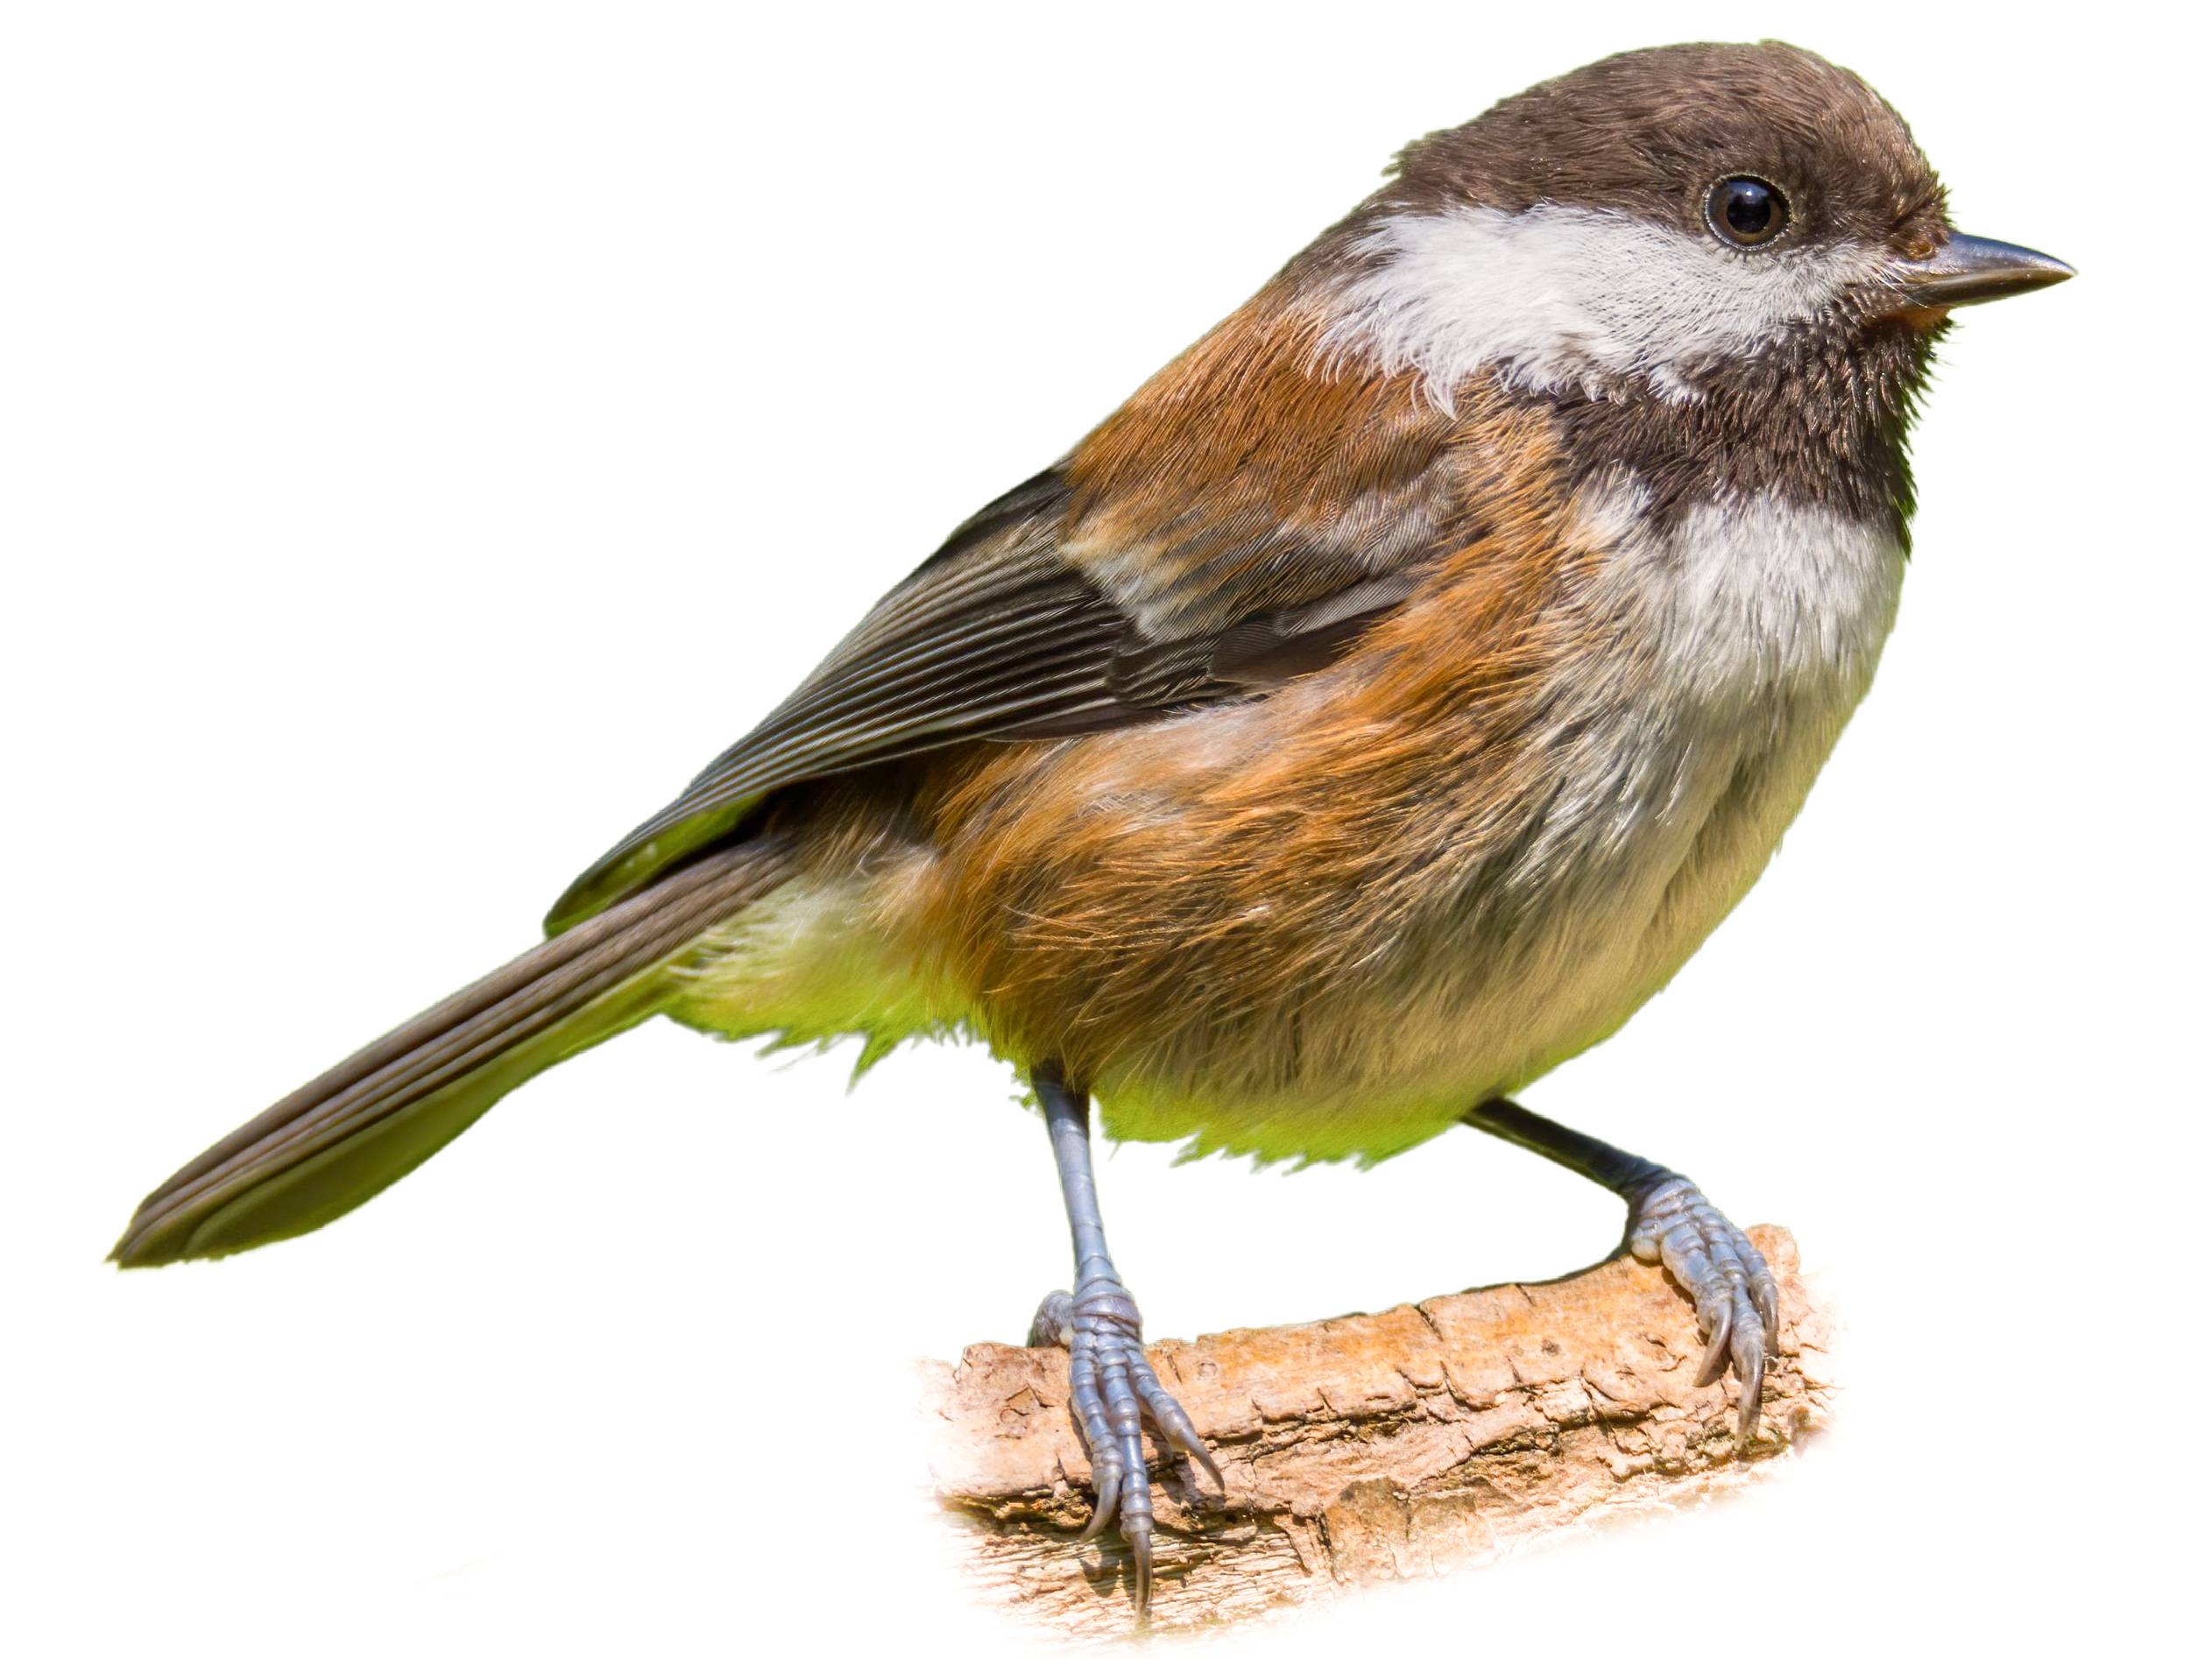 A photo of a Chestnut-backed Chickadee (Poecile rufescens)